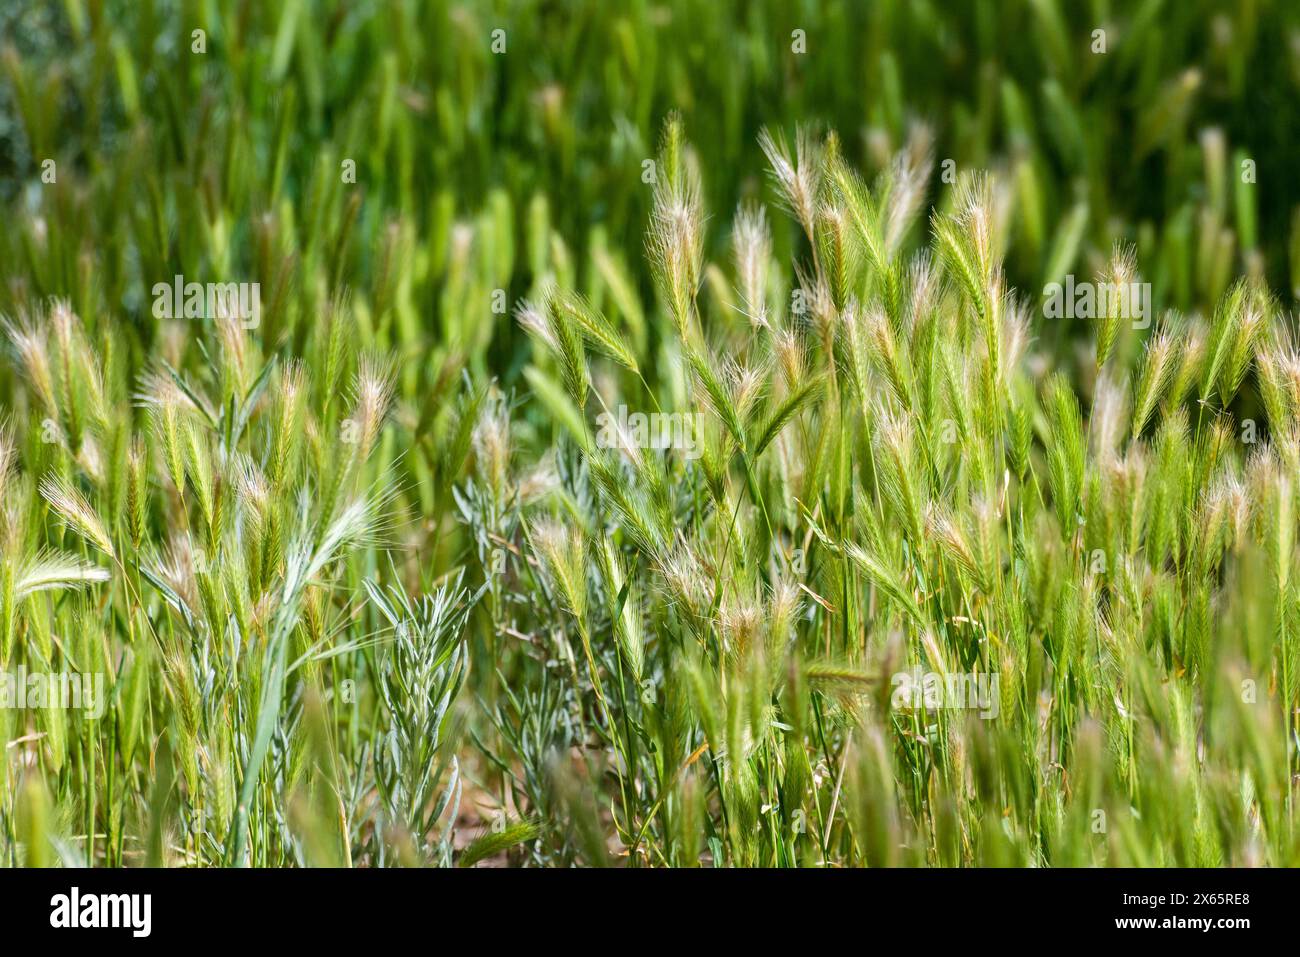 A field of green grass with a few brown spots Stock Photo